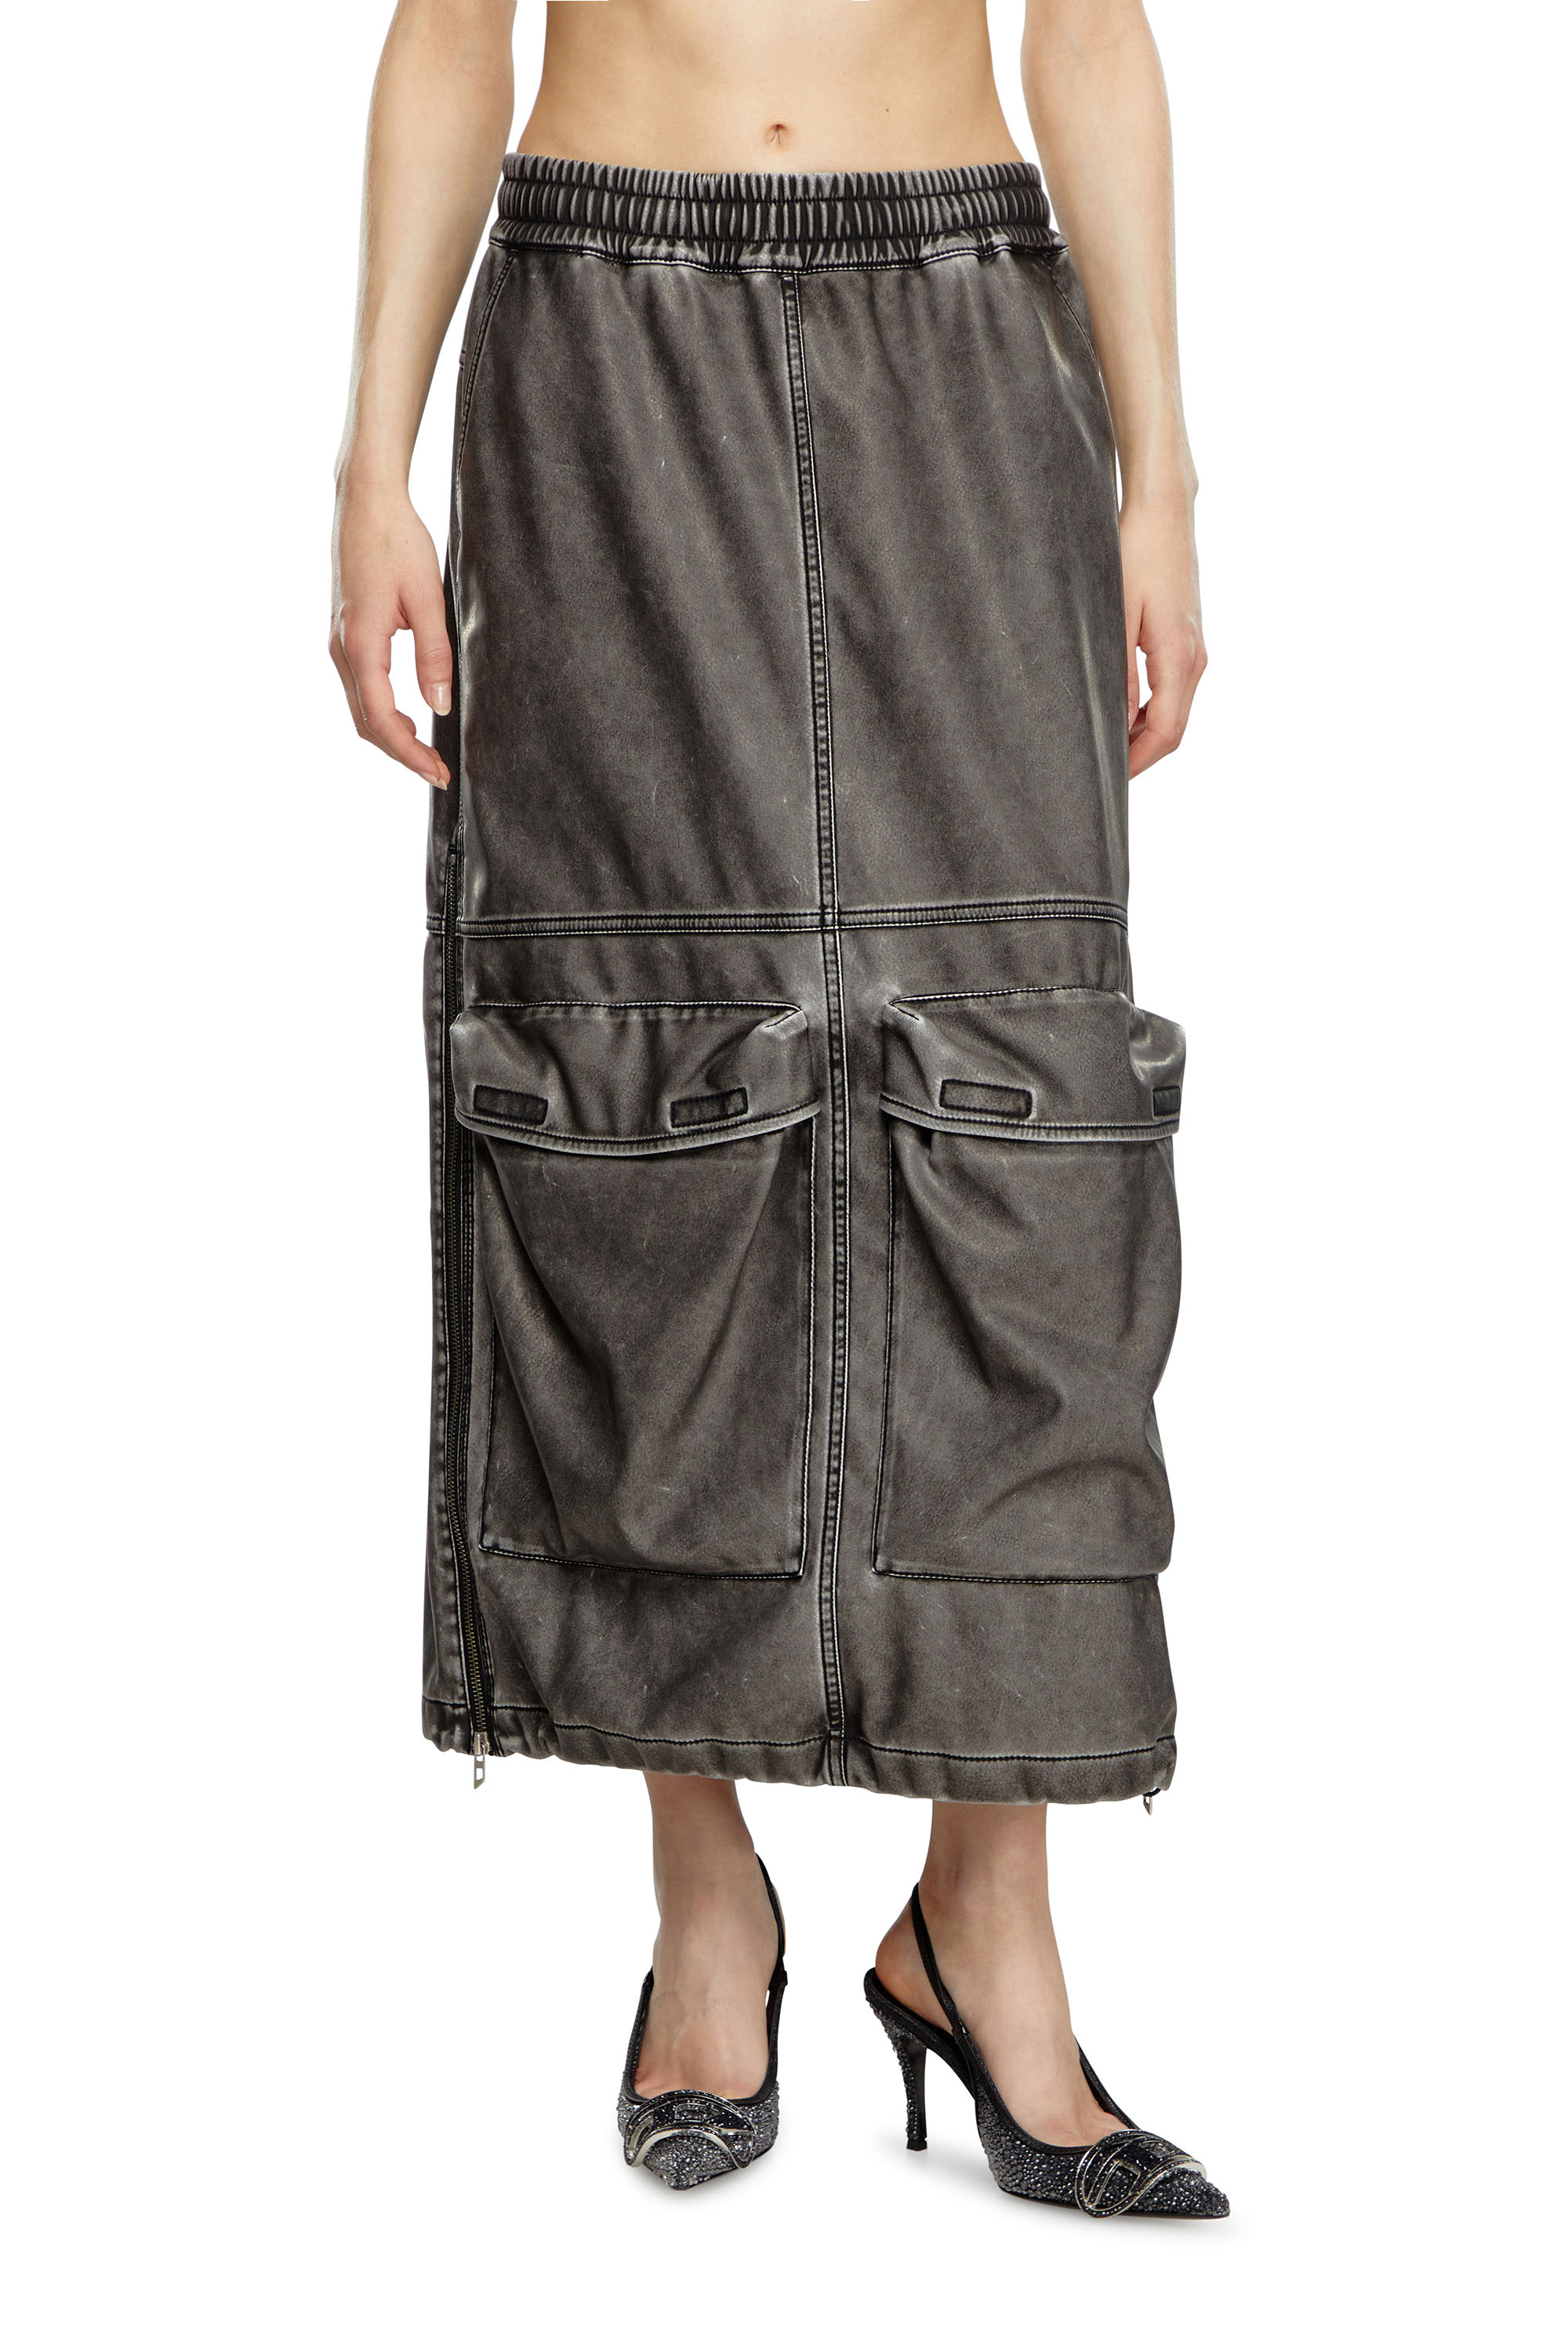 Diesel - O-DYSSEY-P1, Female Long skirt in washed tech fabric in グレー - Image 2